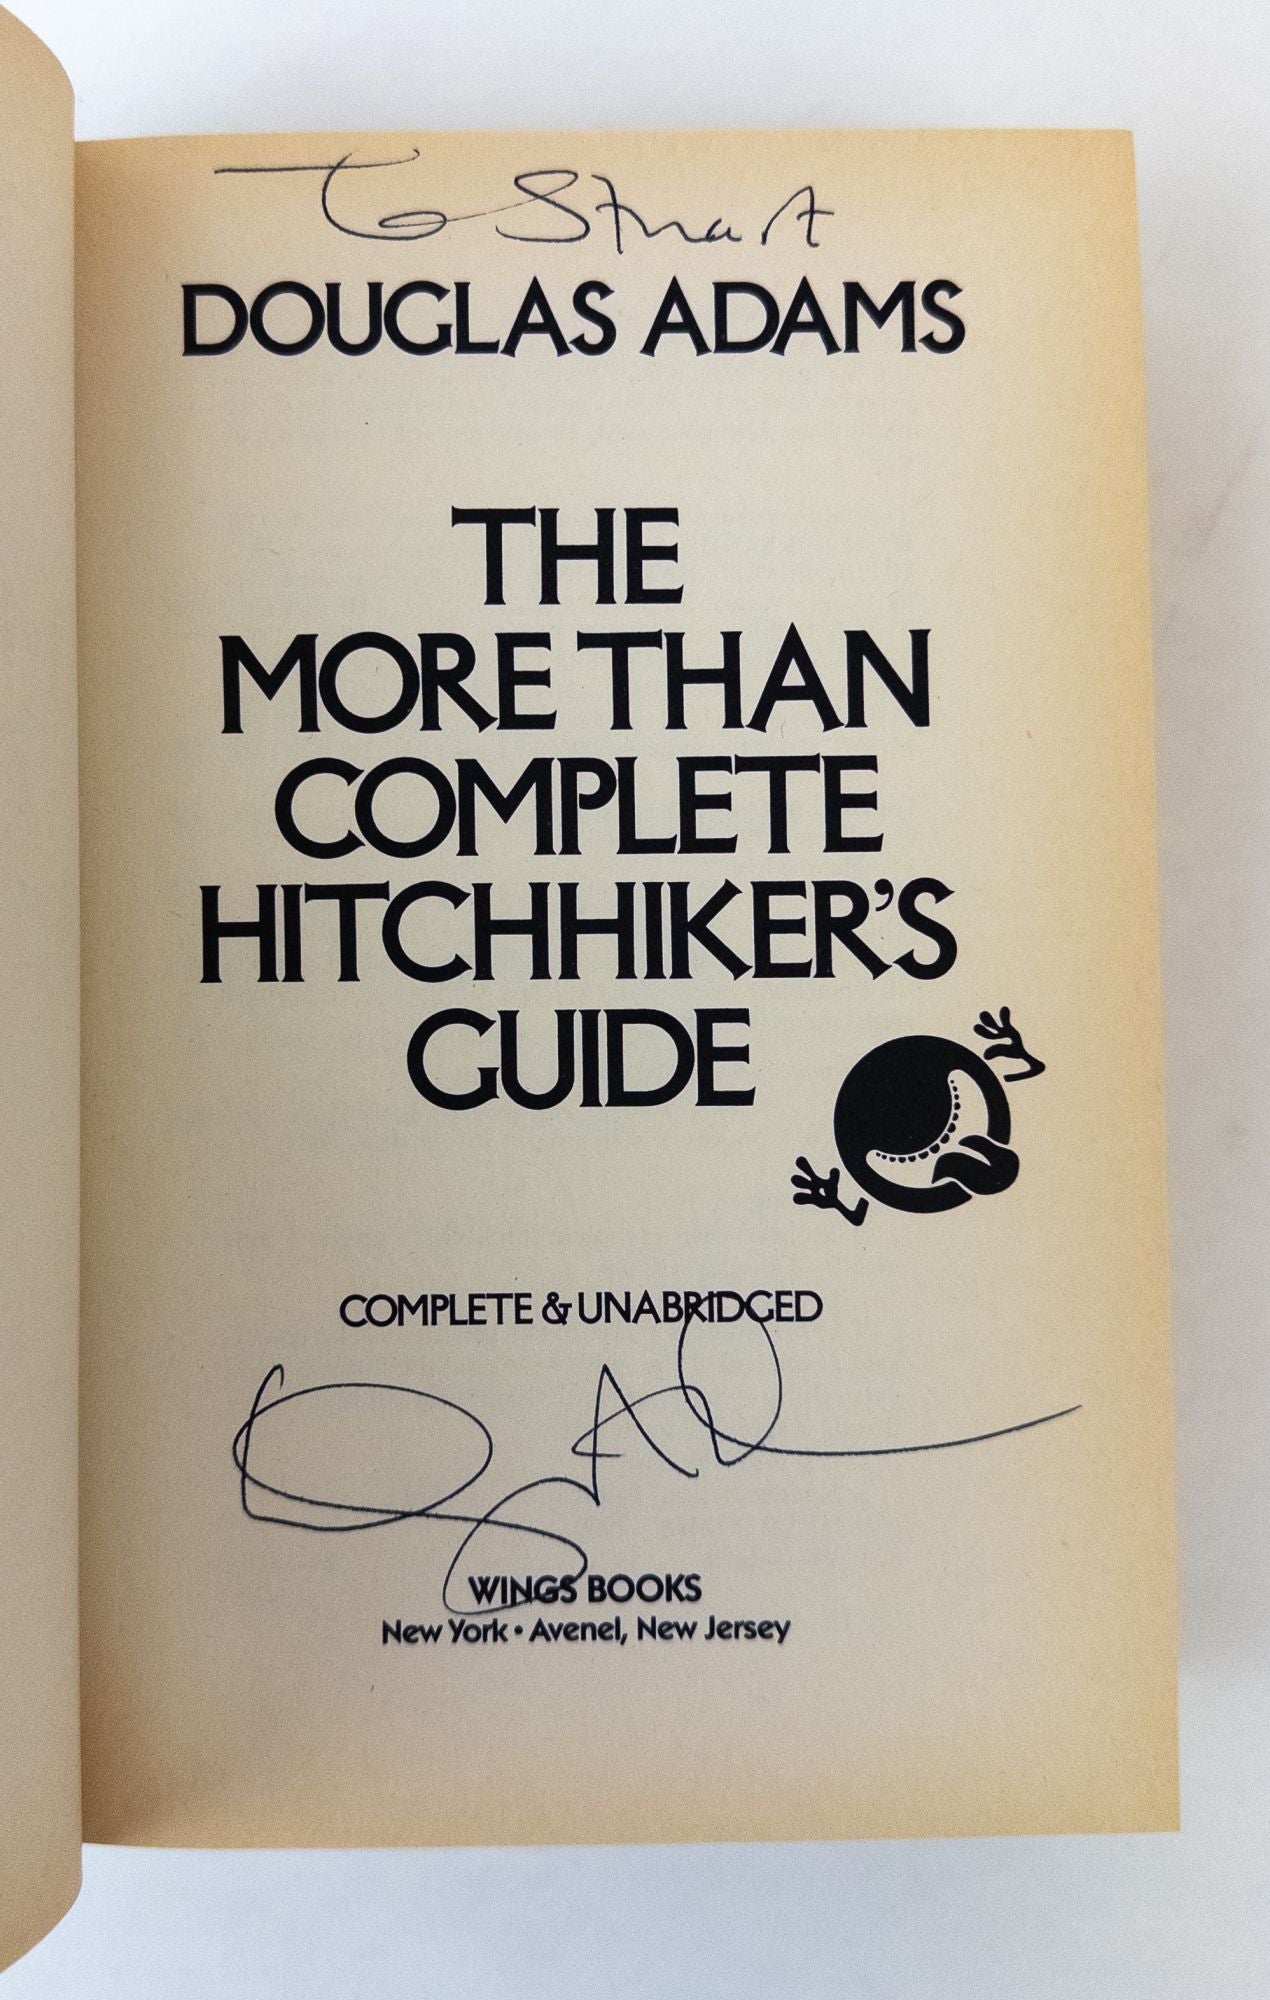 Product Image for THE MORE THAN COMPLETE HITCHHIKER'S GUIDE [Inscribed]